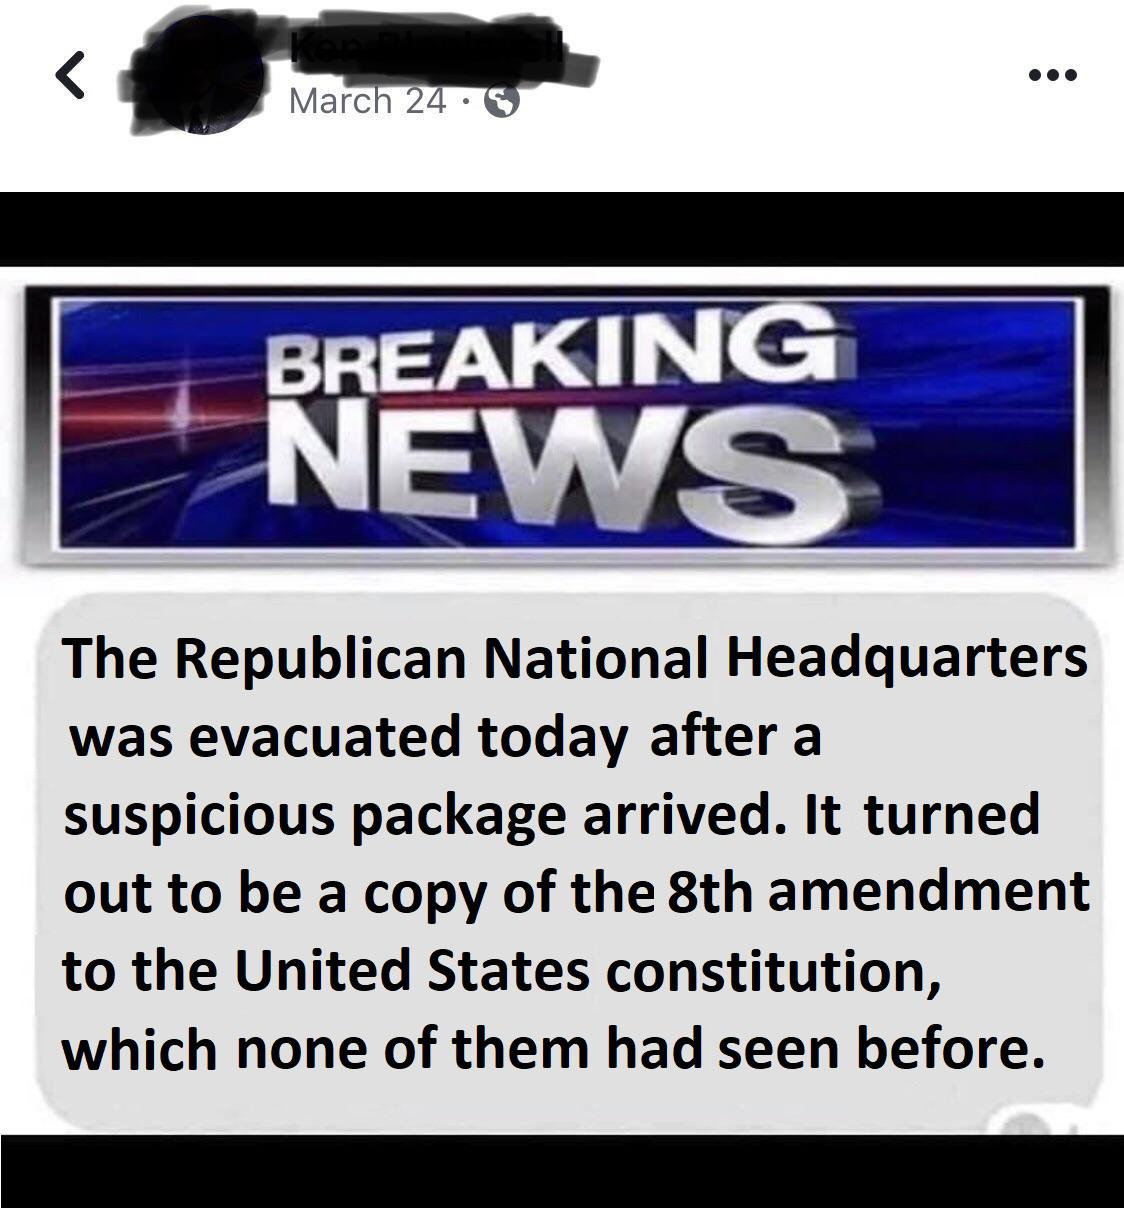 political political-memes political text: Marc 24 • BREAKIN NEWS The Republican National Headquarters was evacuated today after a suspicious package arrived. It turned out to be a copy of the 8th amendment to the United States constitution, which none of them had seen before. 